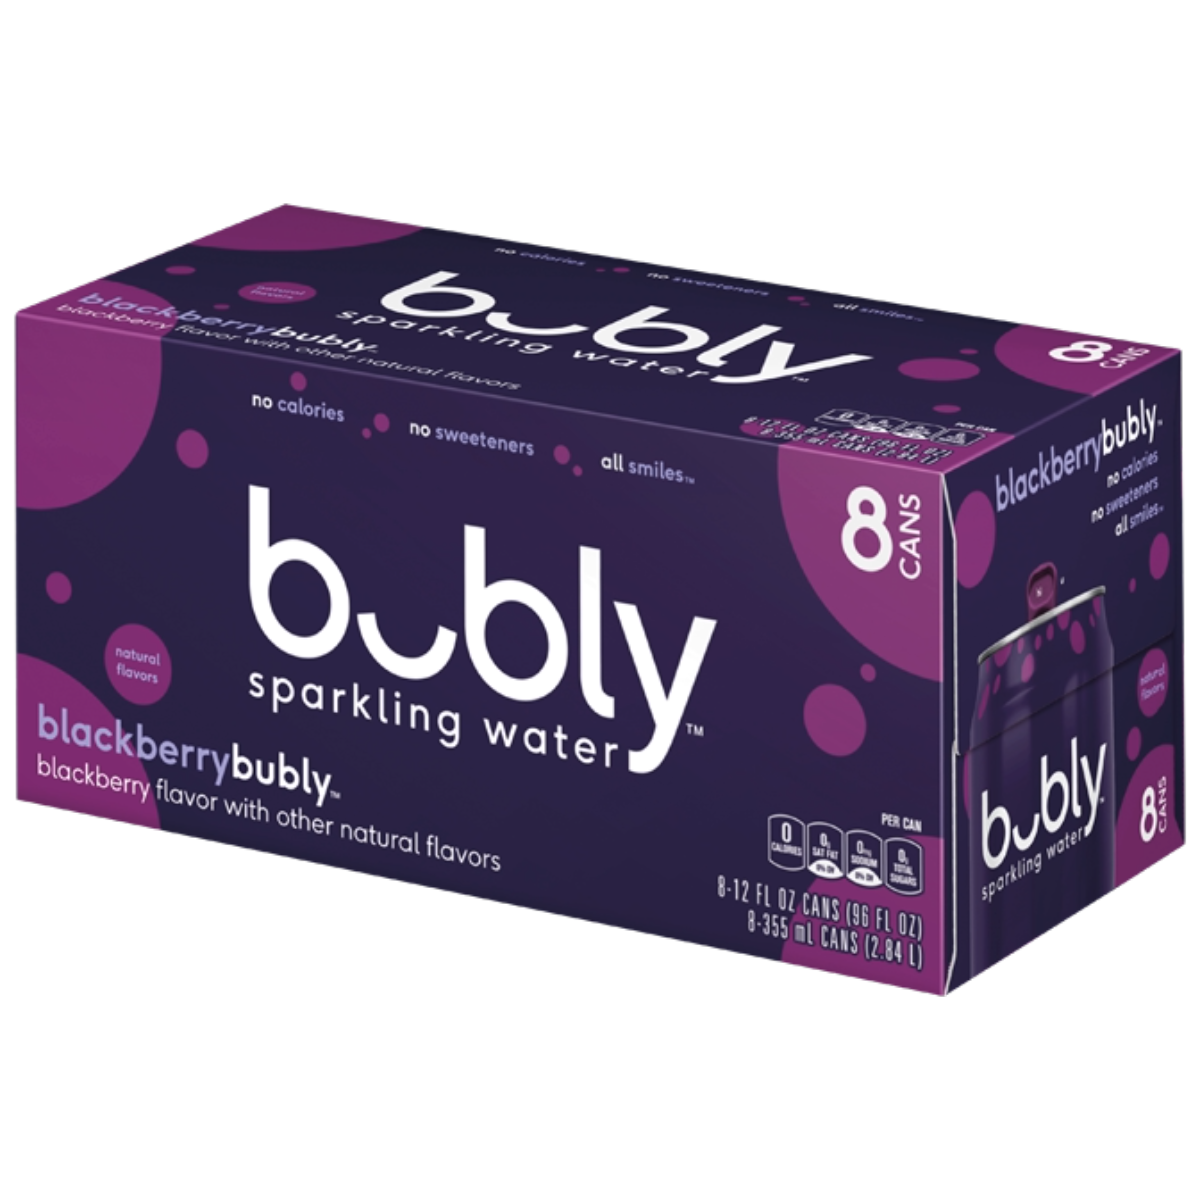 BUBLY SPARKLING WATER BLACKBERRY